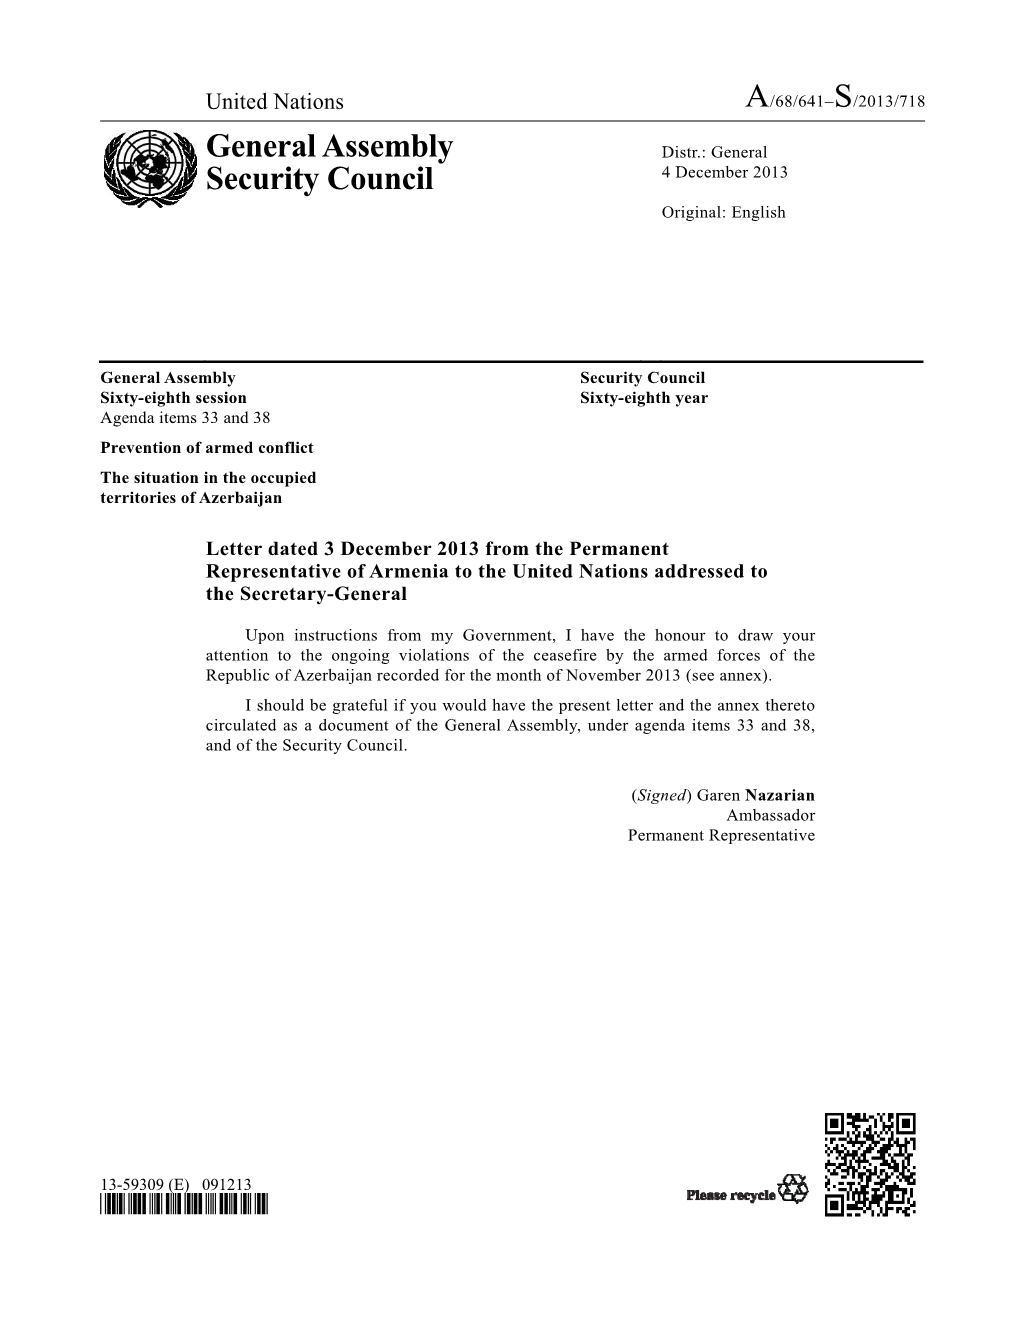 General Assembly Security Council Sixty-Eighth Session Sixty-Eighth Year Agenda Items 33 and 38